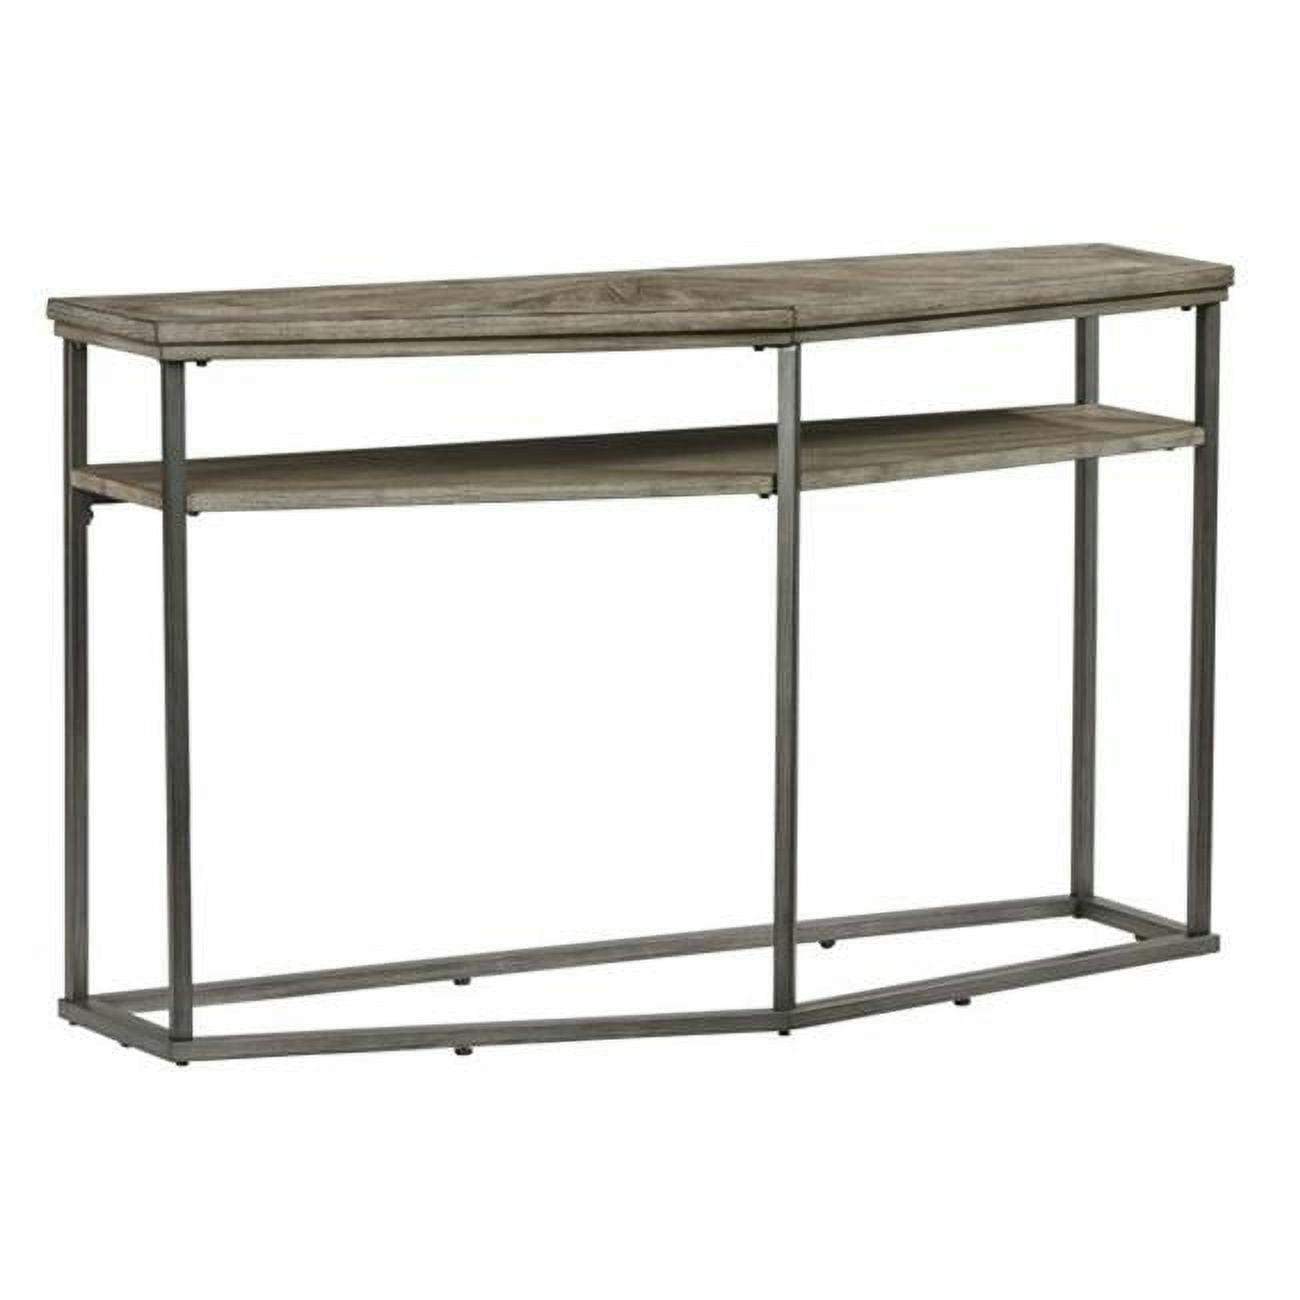 Transitional Ash Blonde & Dark Gray D-Shaped Sofa Table with Storage Shelf